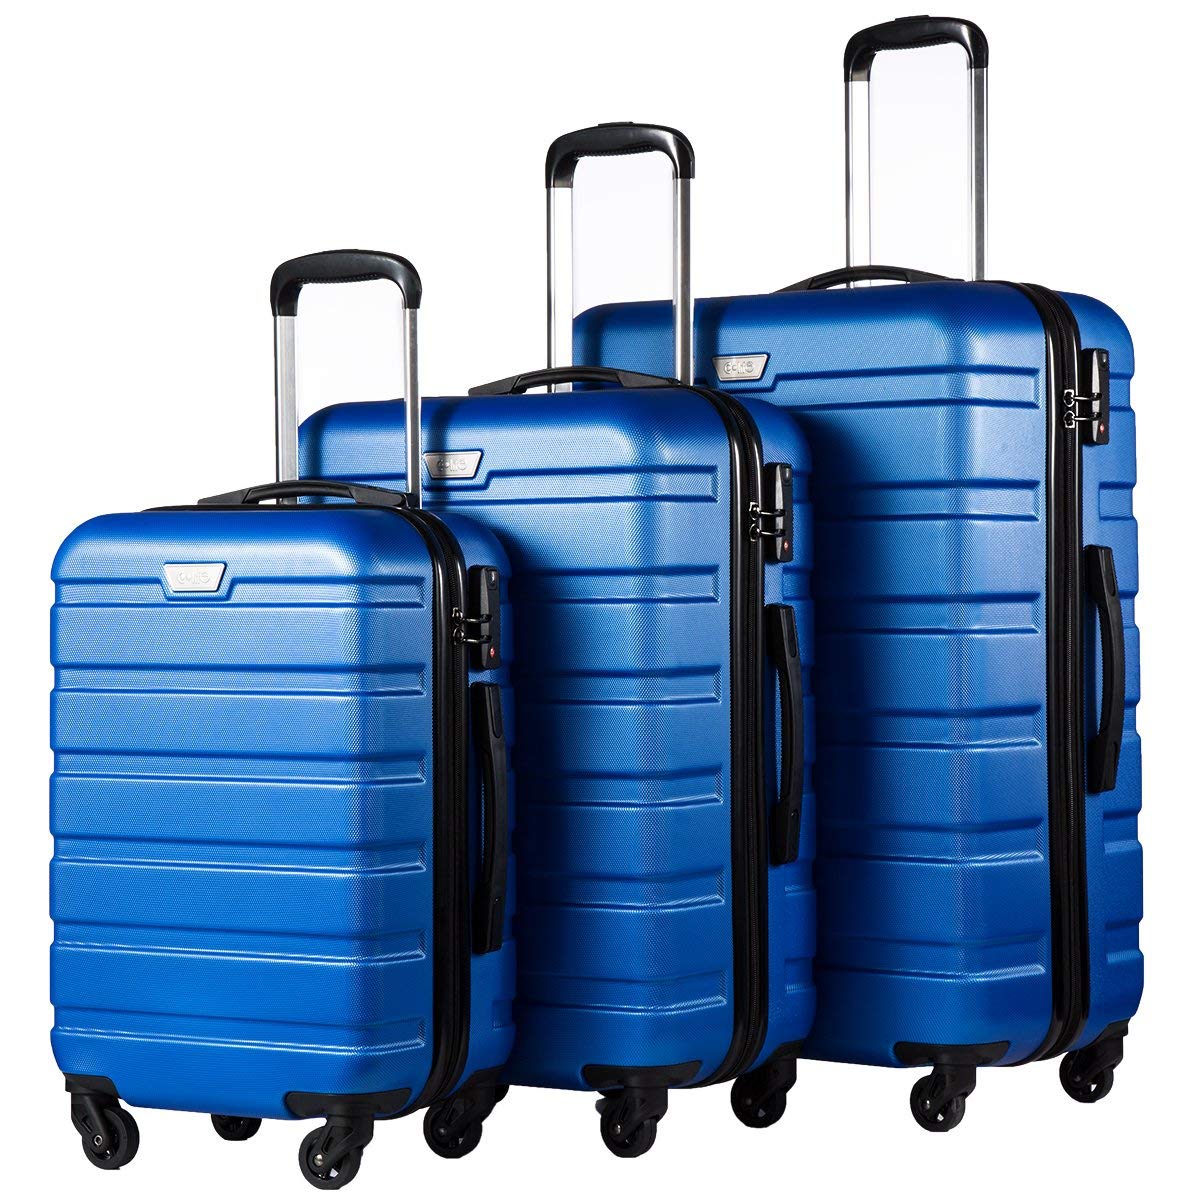 Coolife Luggage 3 Piece